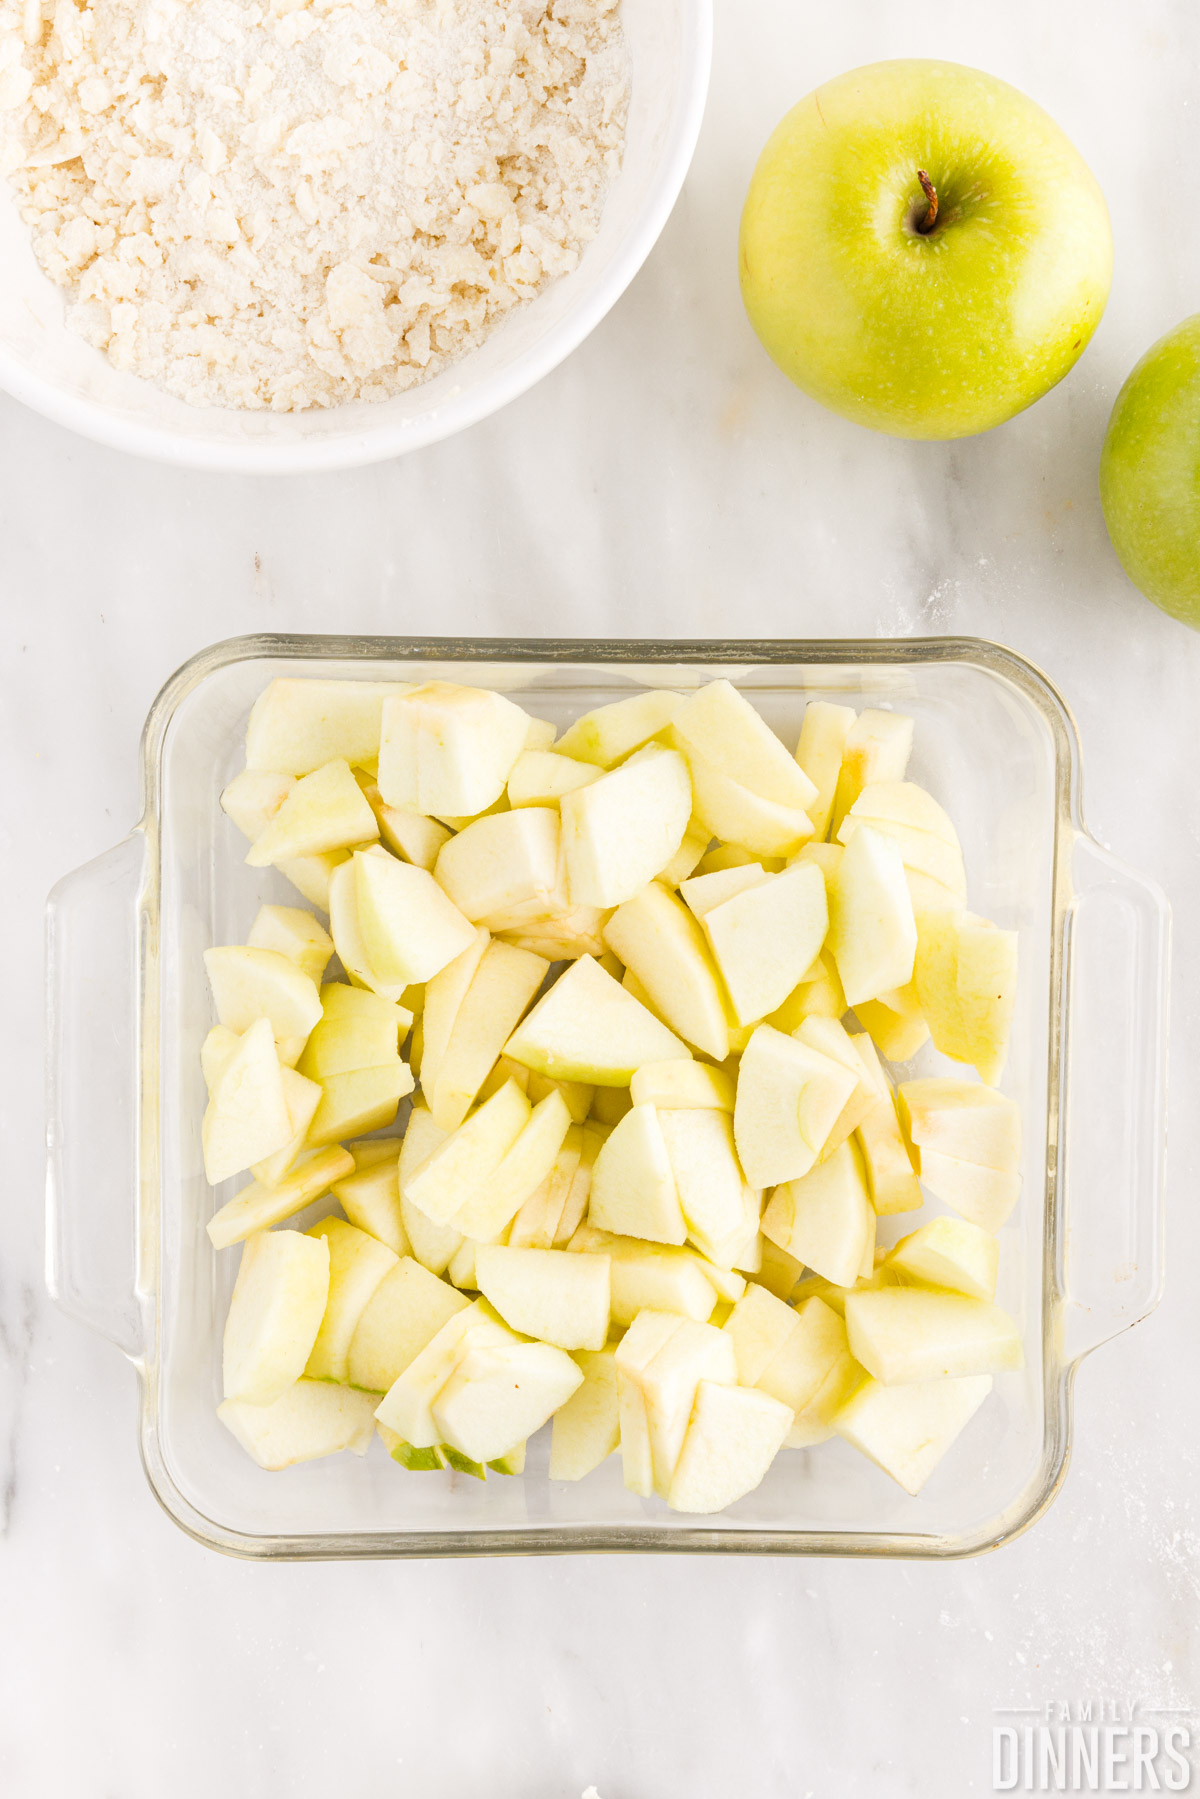 peeled, cored and sliced apples in a baking dish